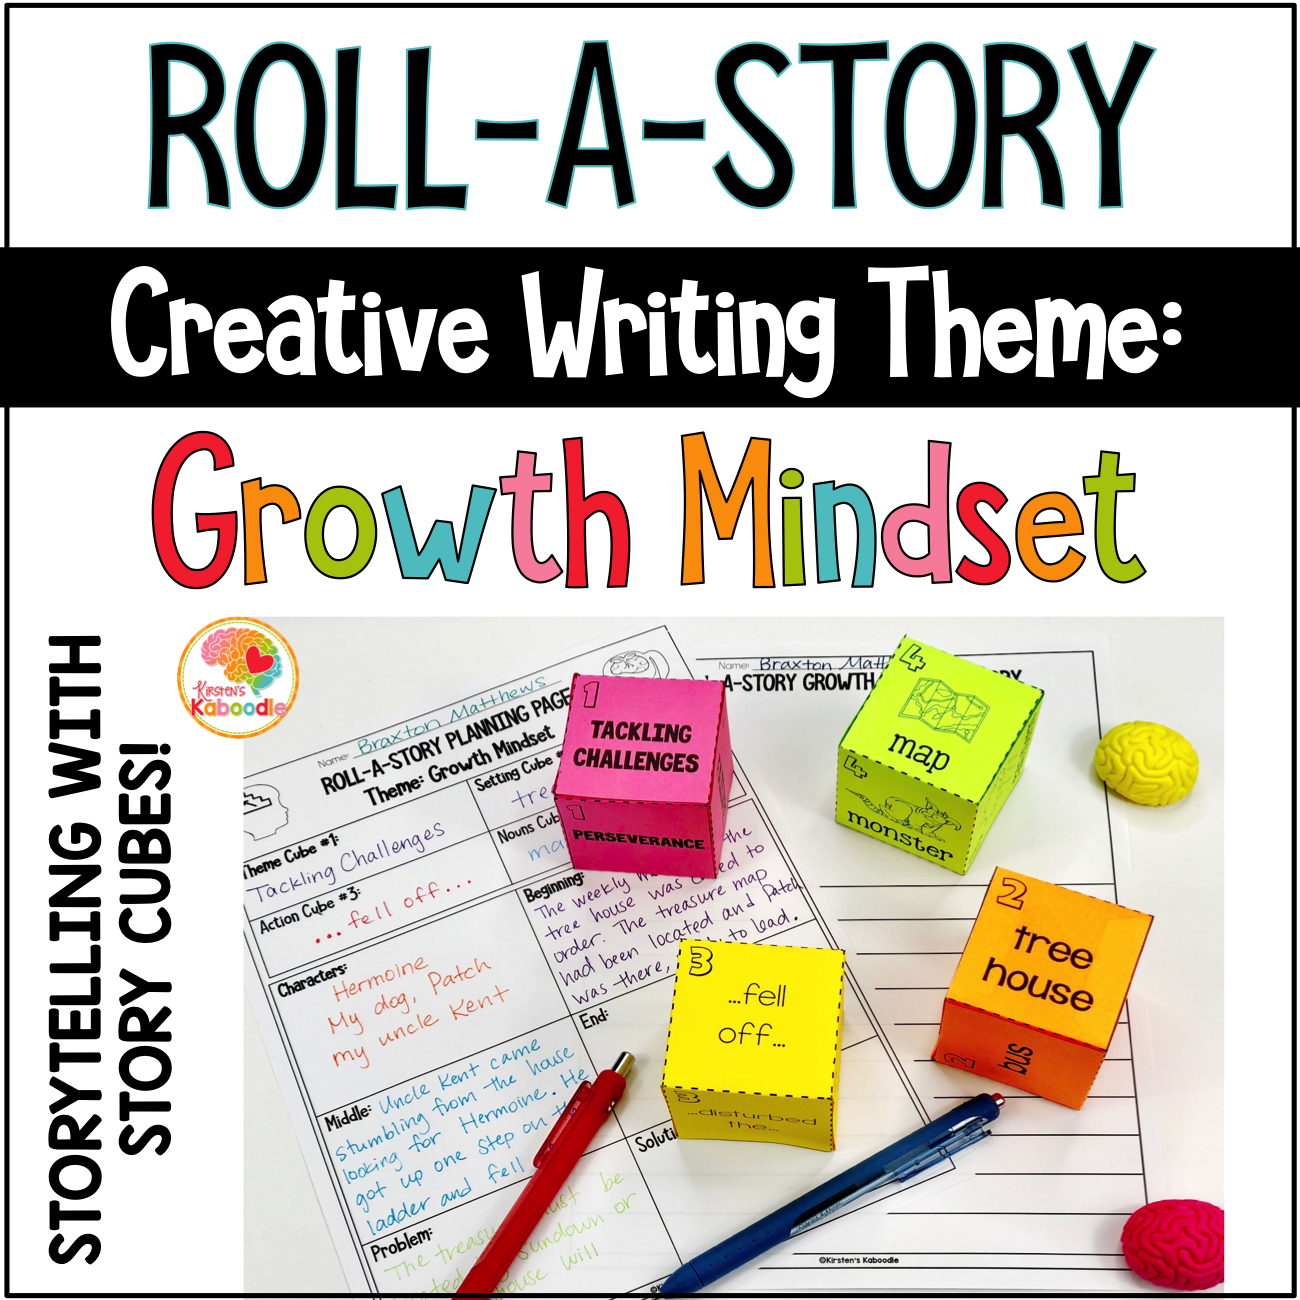 Roll-a-Story: Growth Mindset Creative Writing Activity